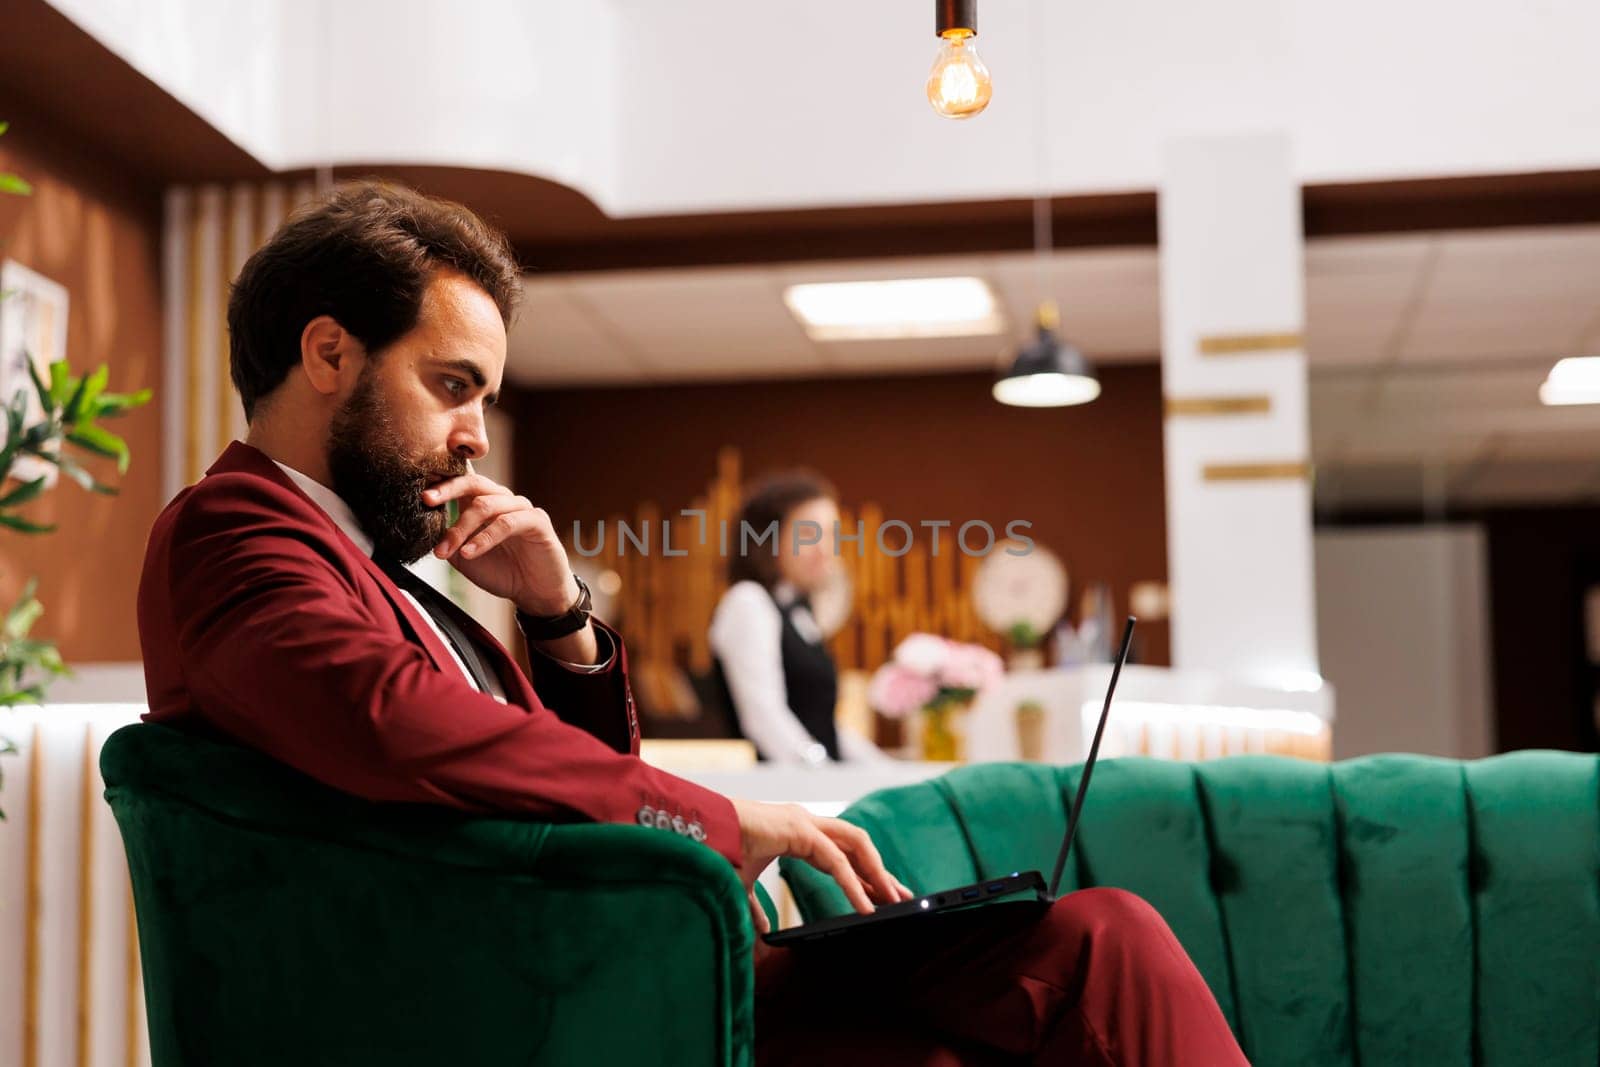 Company manager on business trip preparing to attend meeting in lounge area at hotel. Businessman waiting in reception lobby, checking presentation on laptop before starting conference.